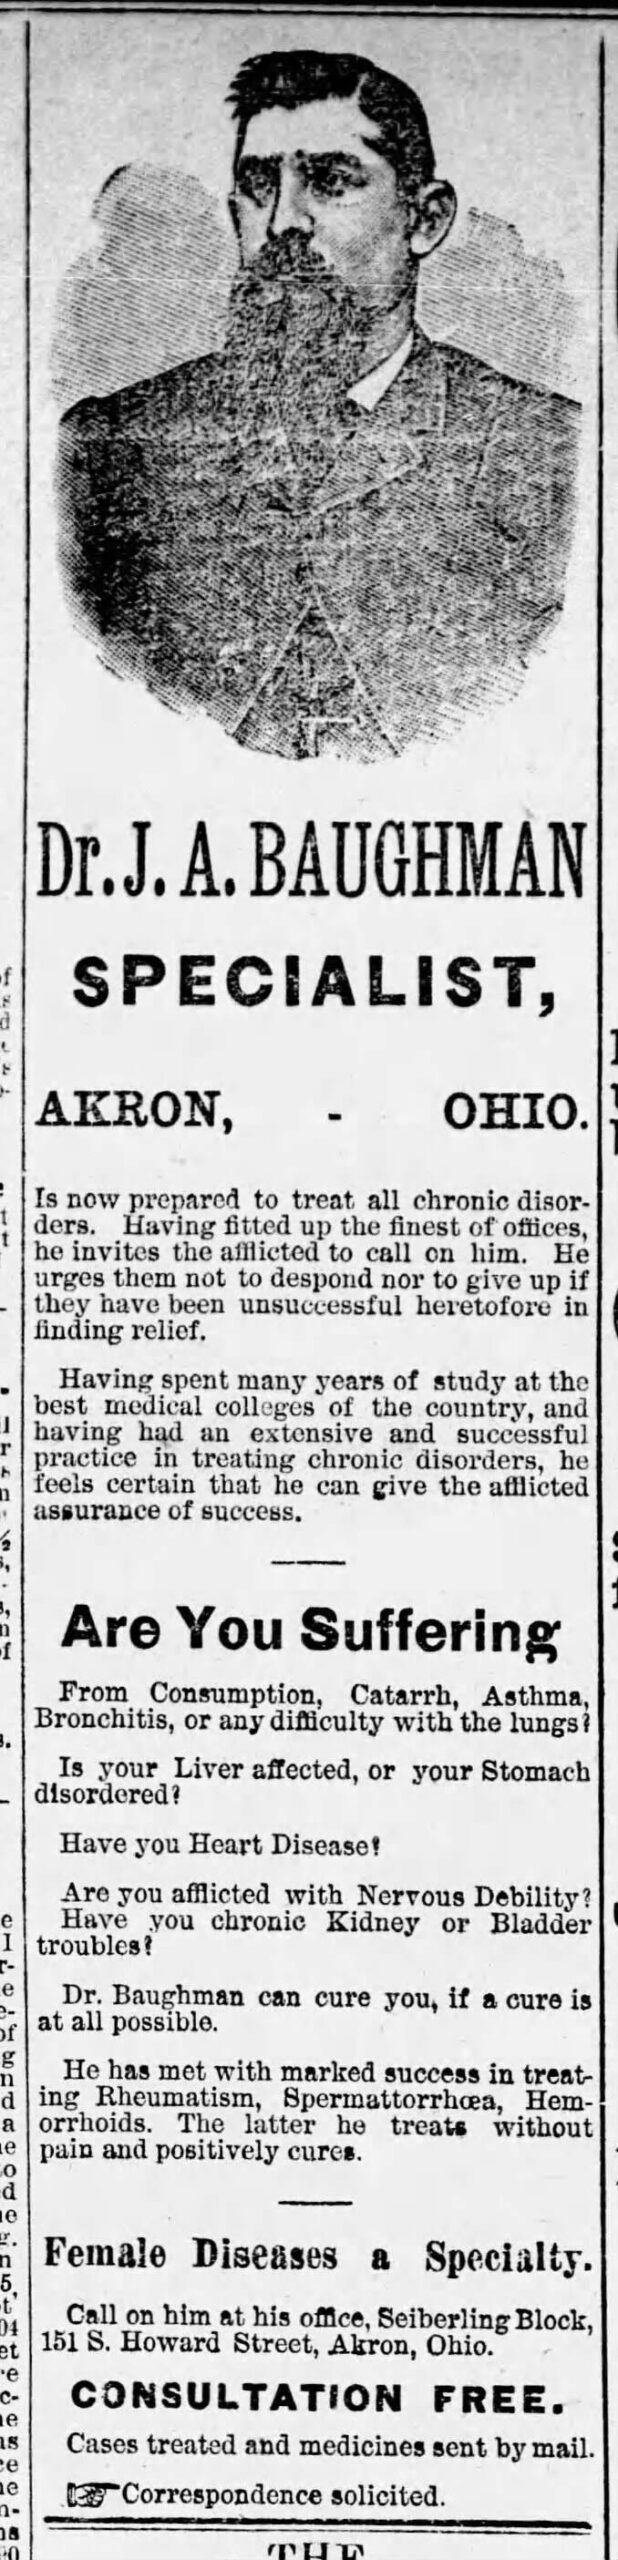 This 1889 advertisement from the Akron (Ohio) City Times announces Dr. John Baughman’s medical specialties and emphasizes his expertise.